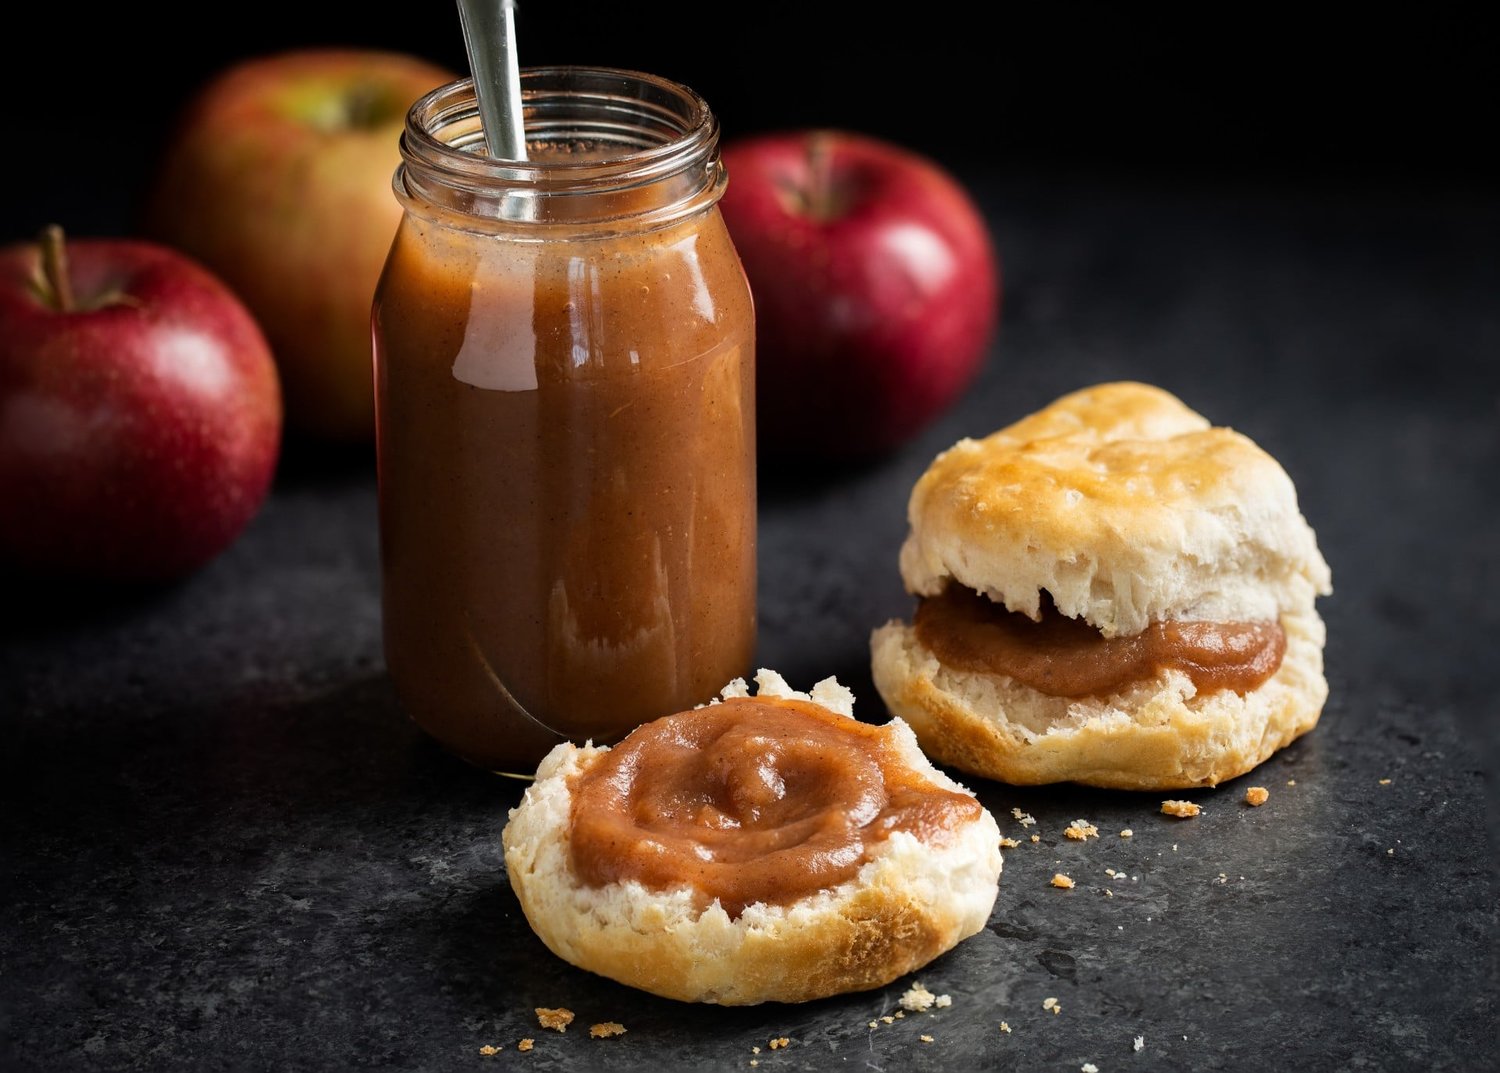 America’s version of apple butter has its roots in Pennsylvania, where it was first made by German immigrants known as the Pennsylvania Dutch.